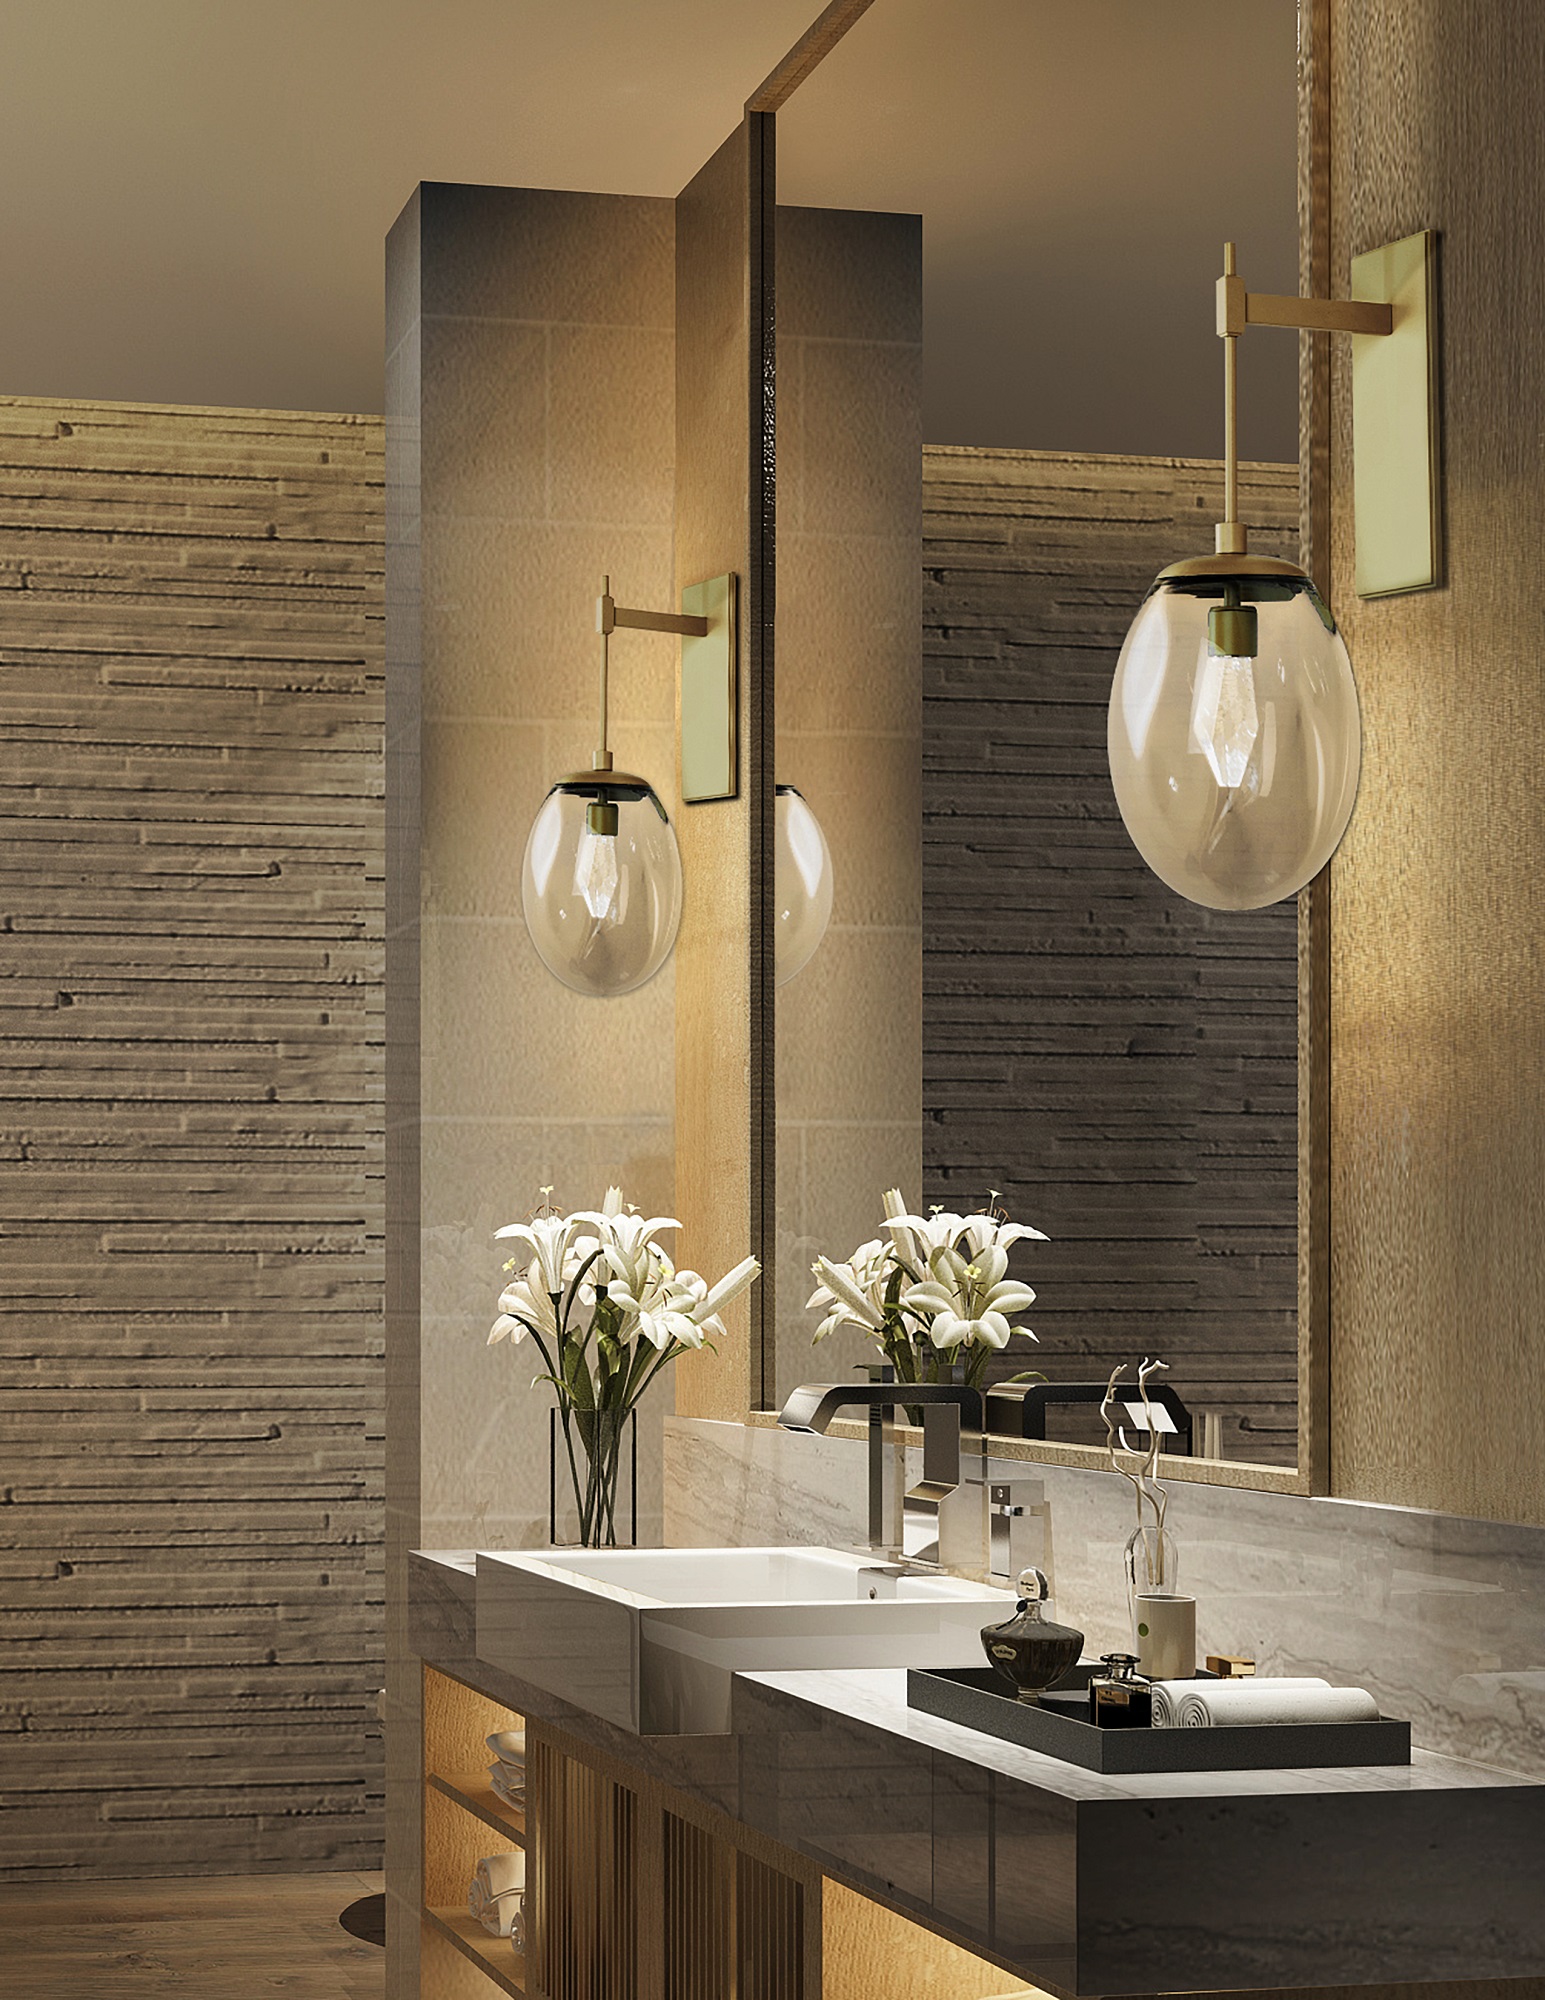 this bathroom vanity features two Hammerton Studio Nebula wall sconces with both hand blown crystal glass shades and cast crystal glass bulbs